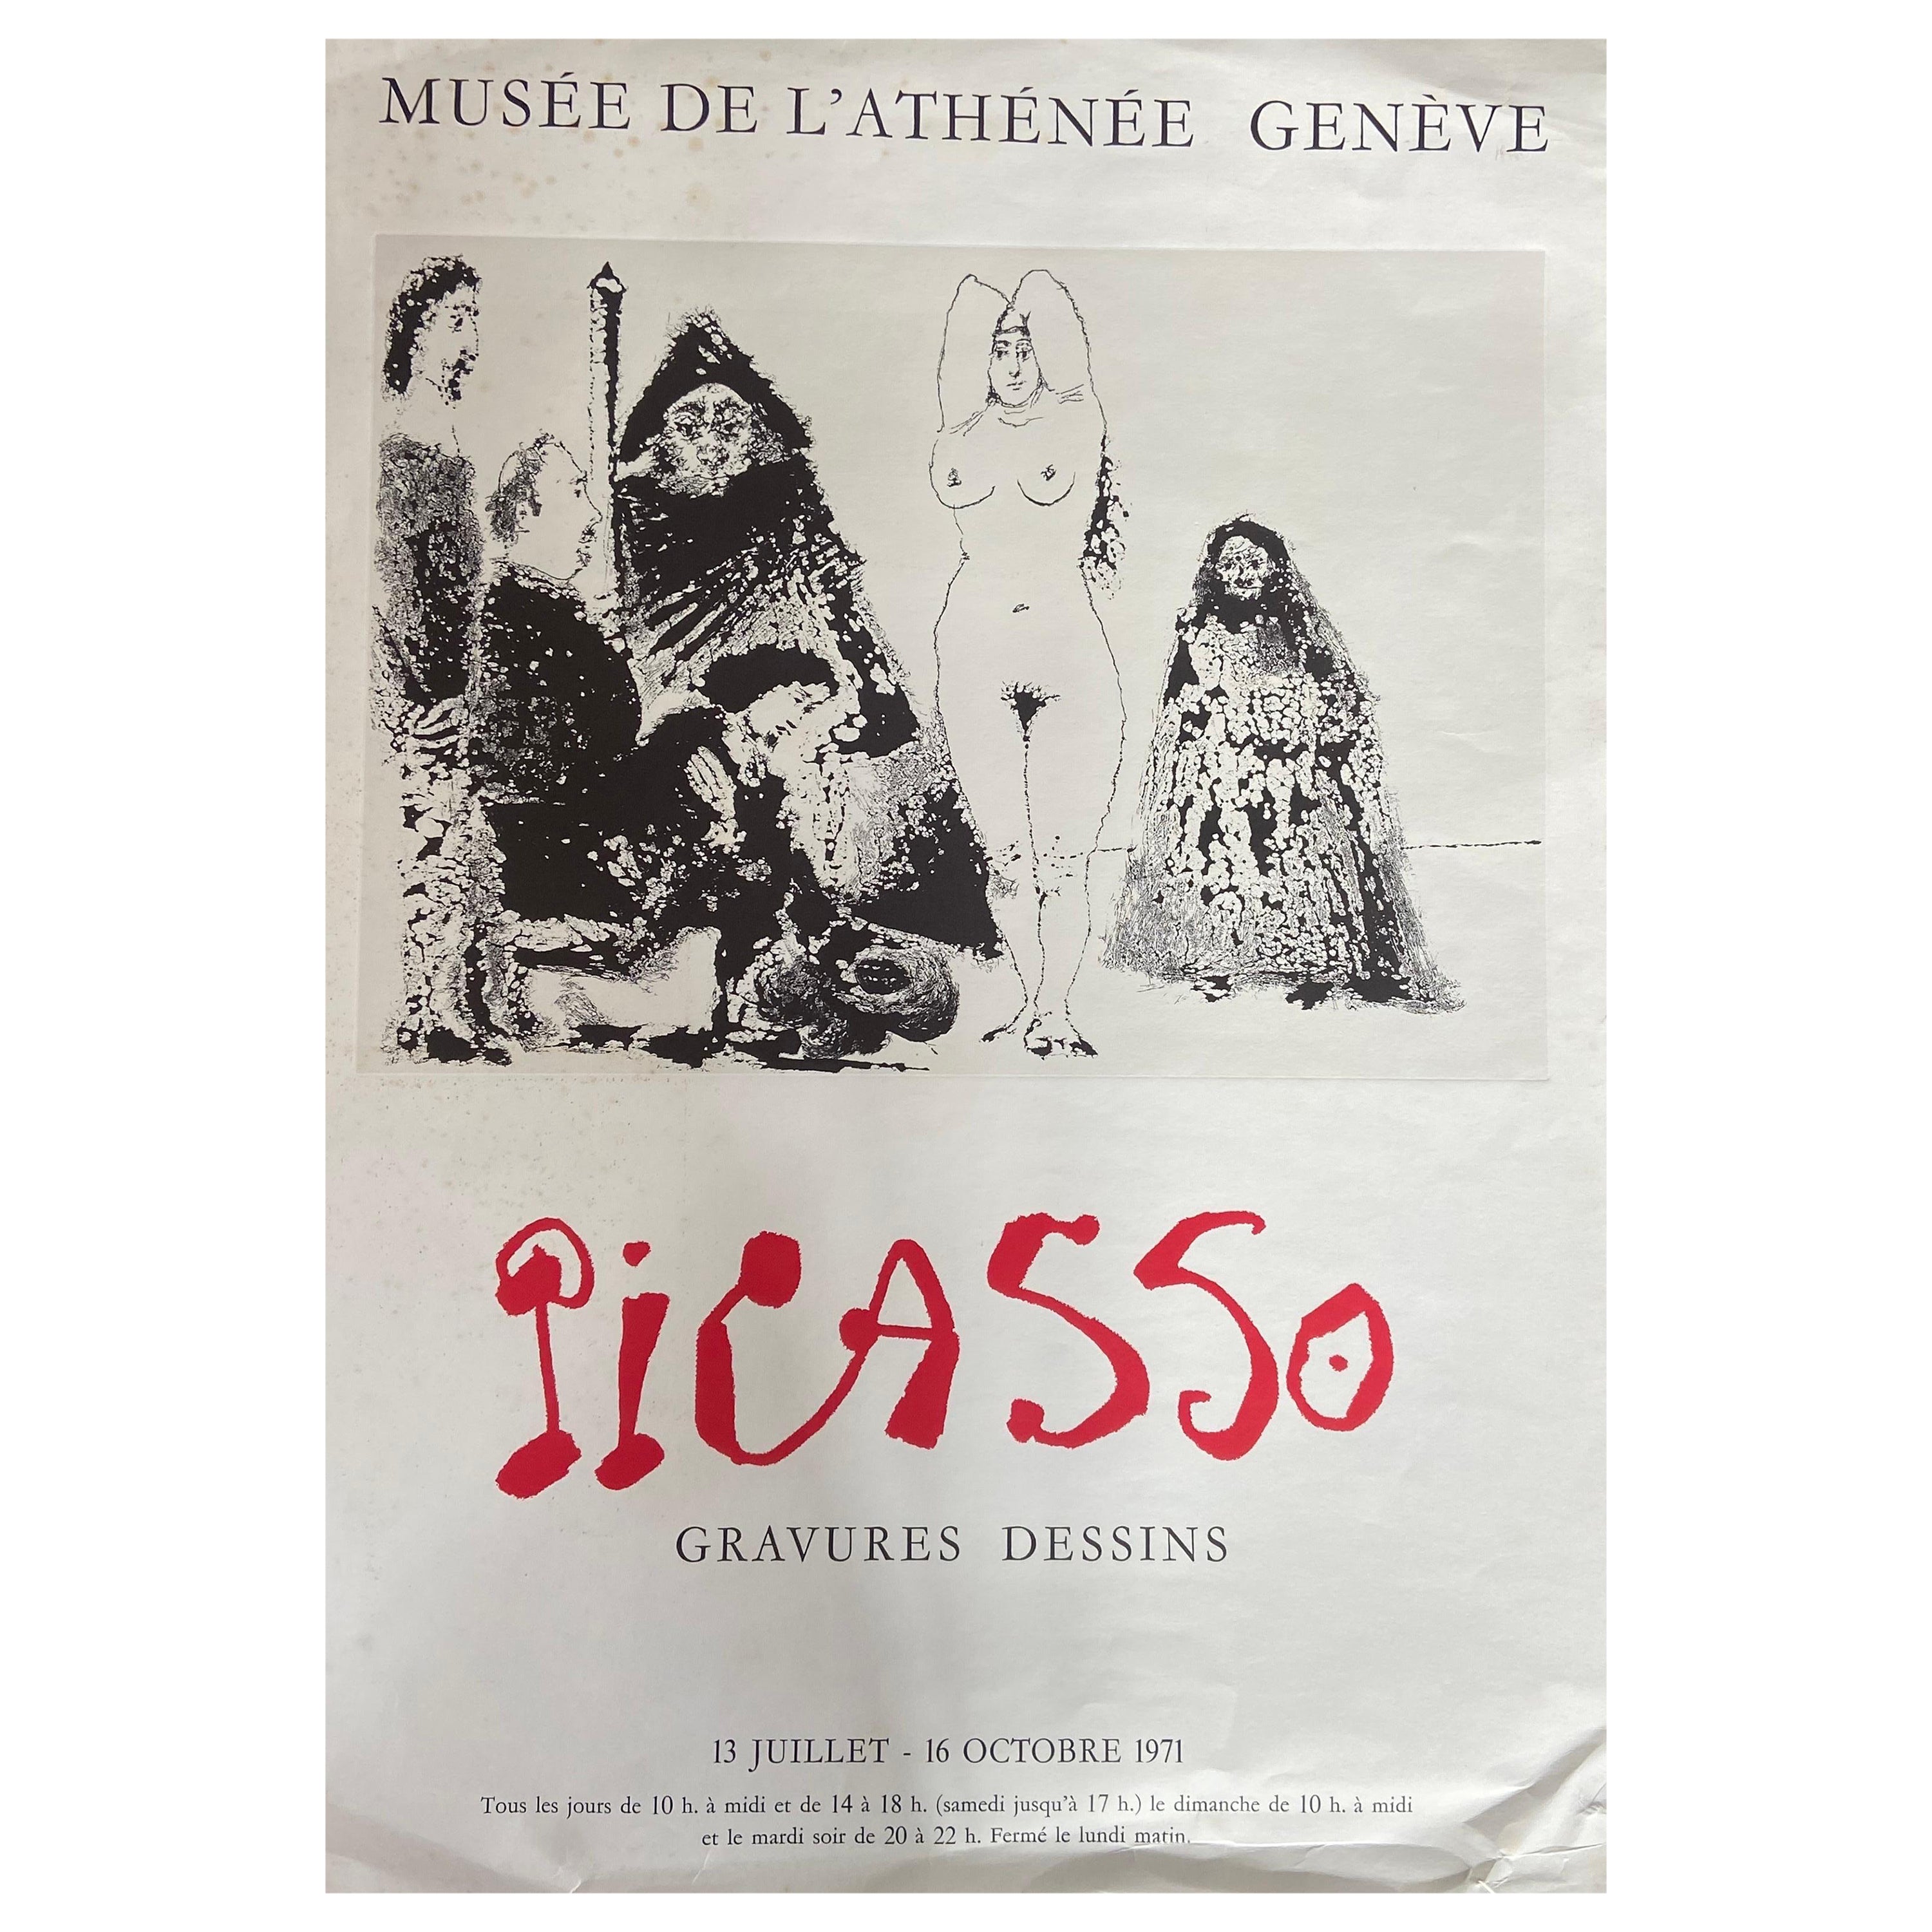 Original Poster for Picasso Exhibition in Geneva back in 1971 For Sale